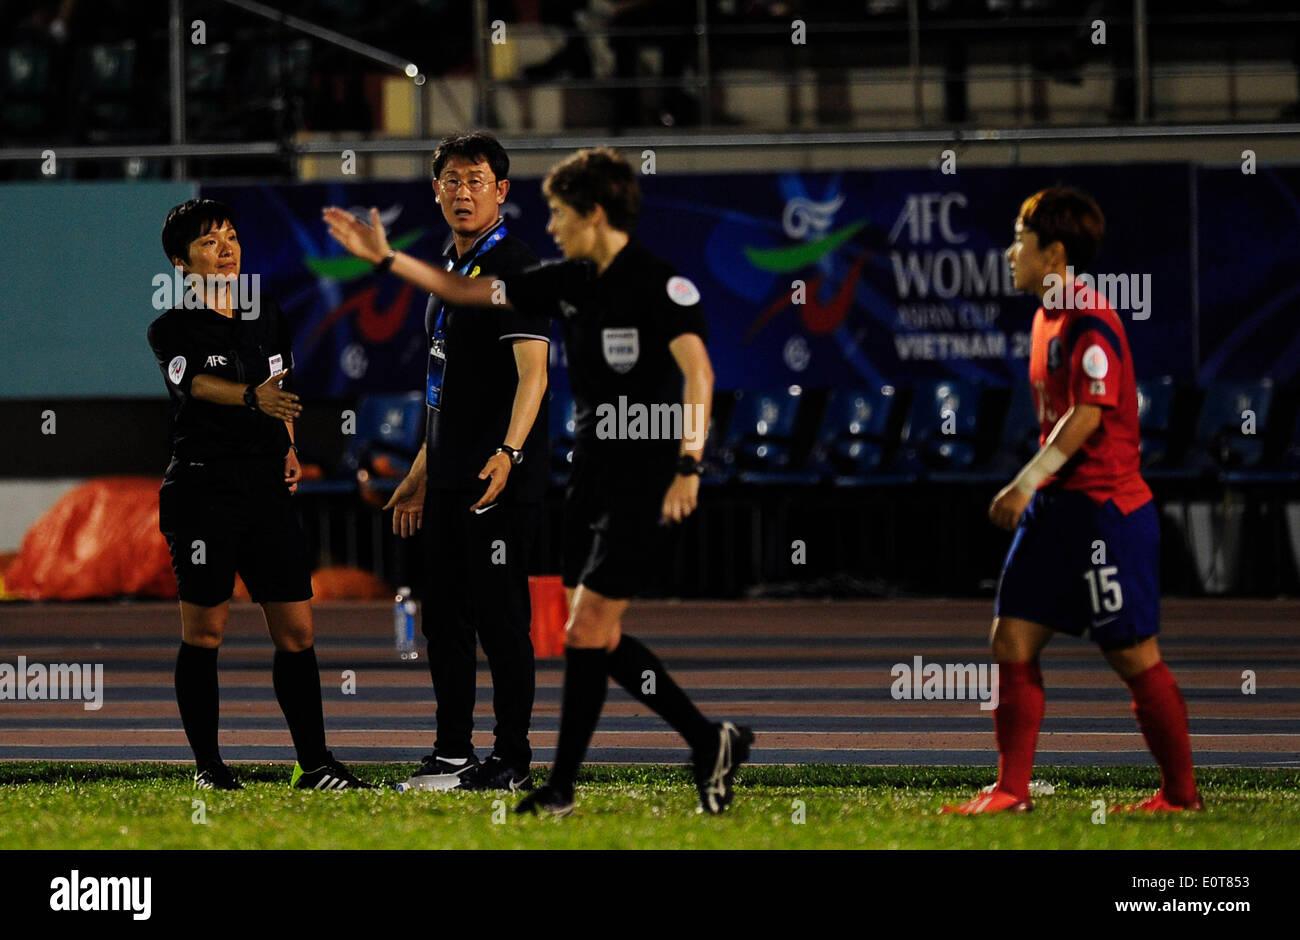 Ho Chi Minh, Vietnam. 19th May, 2014. Yoon Duk Yeo (2nd L), head coach of South Korea, argues with a referee during the group B match between China and South Korea during the 2014 Women's AFC Cup held at Thong Nhat Stadium in Ho Chi Minh city, Vietnam, May 19, 2014. The match ended with a 0-0 draw. © He Jingjia/Xinhua/Alamy Live News Stock Photo